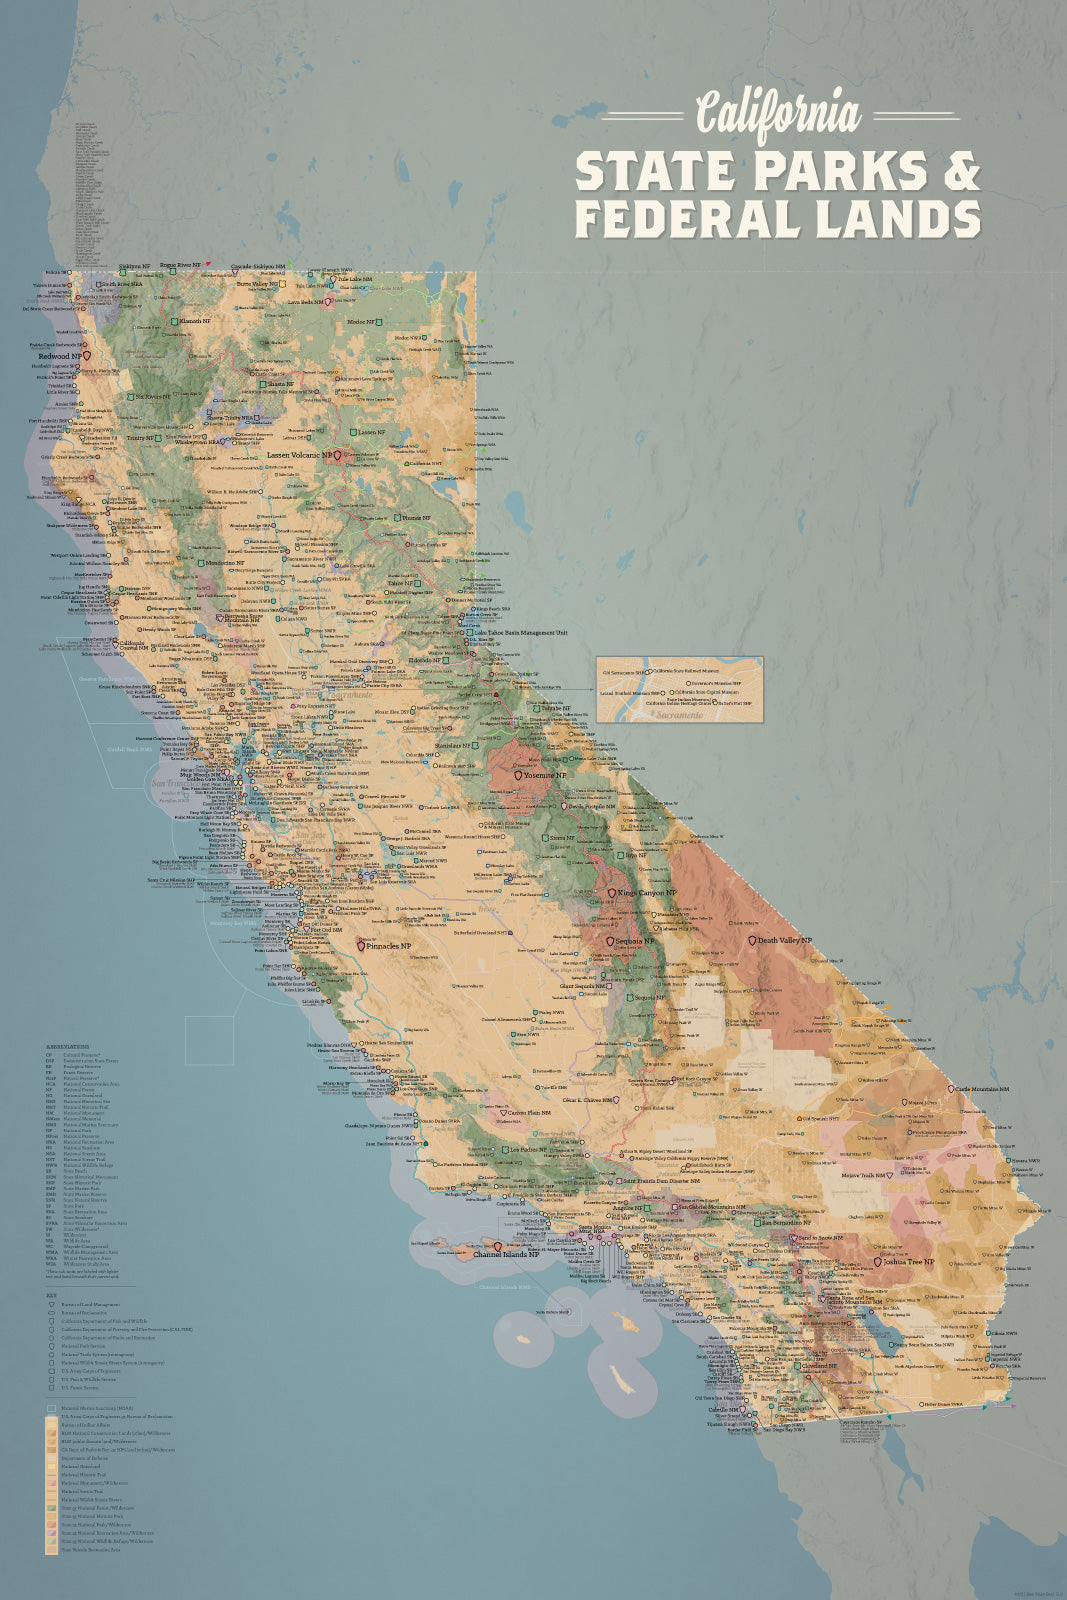 California State Parks And Federal Lands Map 24x36 Poster Best Maps Ever